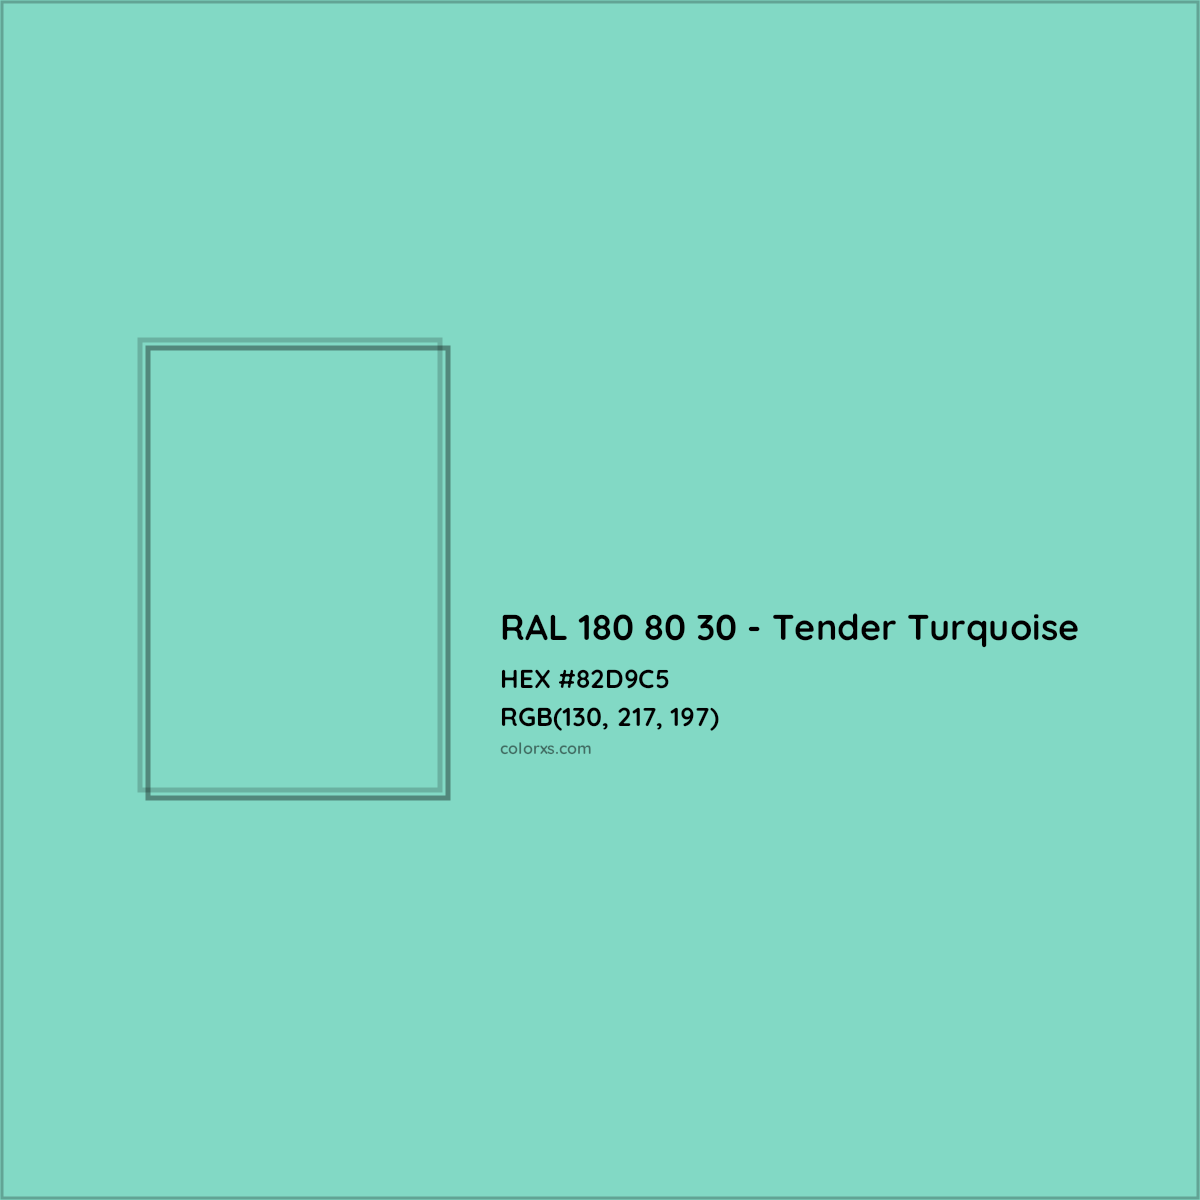 HEX #82D9C5 RAL 180 80 30 - Tender Turquoise CMS RAL Design - Color Code